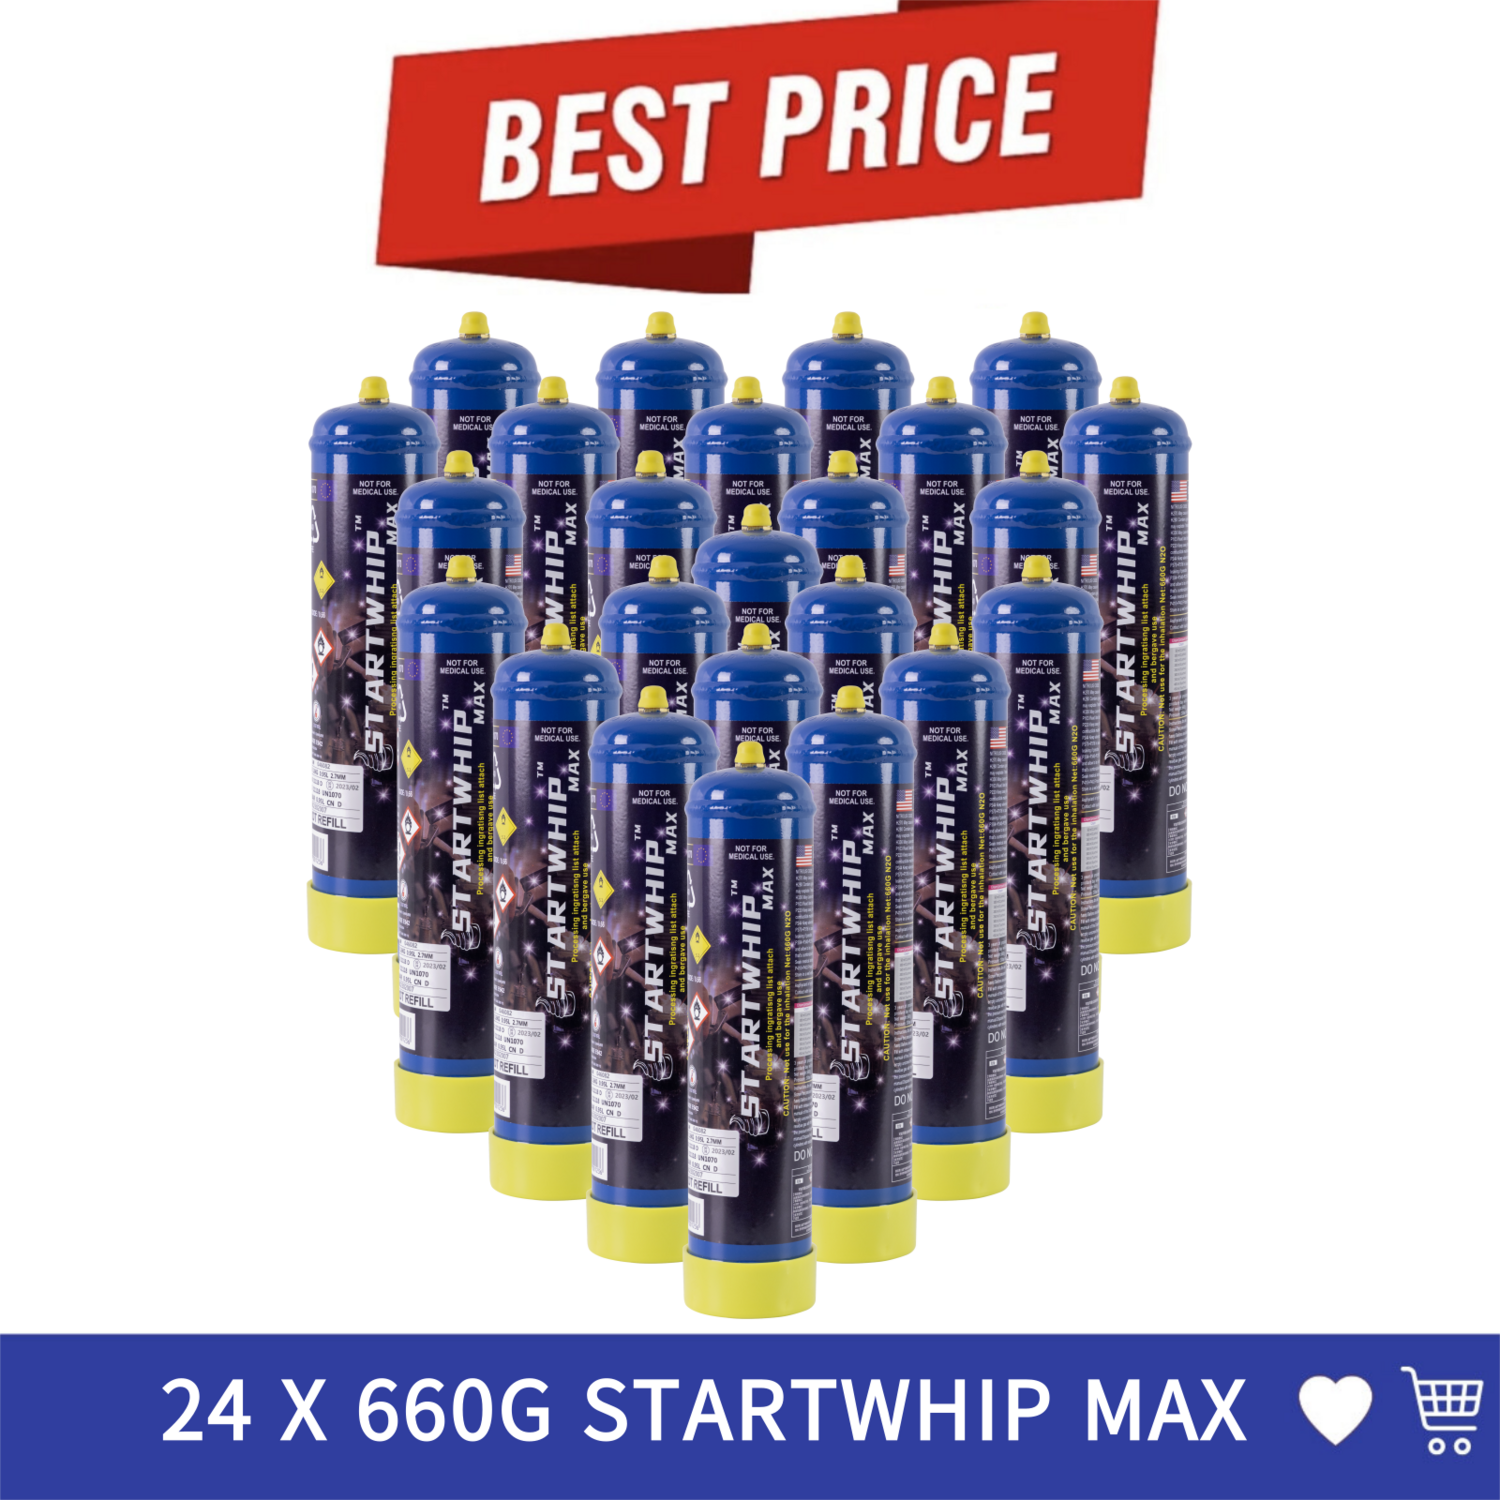 Cream Chargers: 24 x 660g Cylinder Startwhip Max + Pressure Release Nozzle